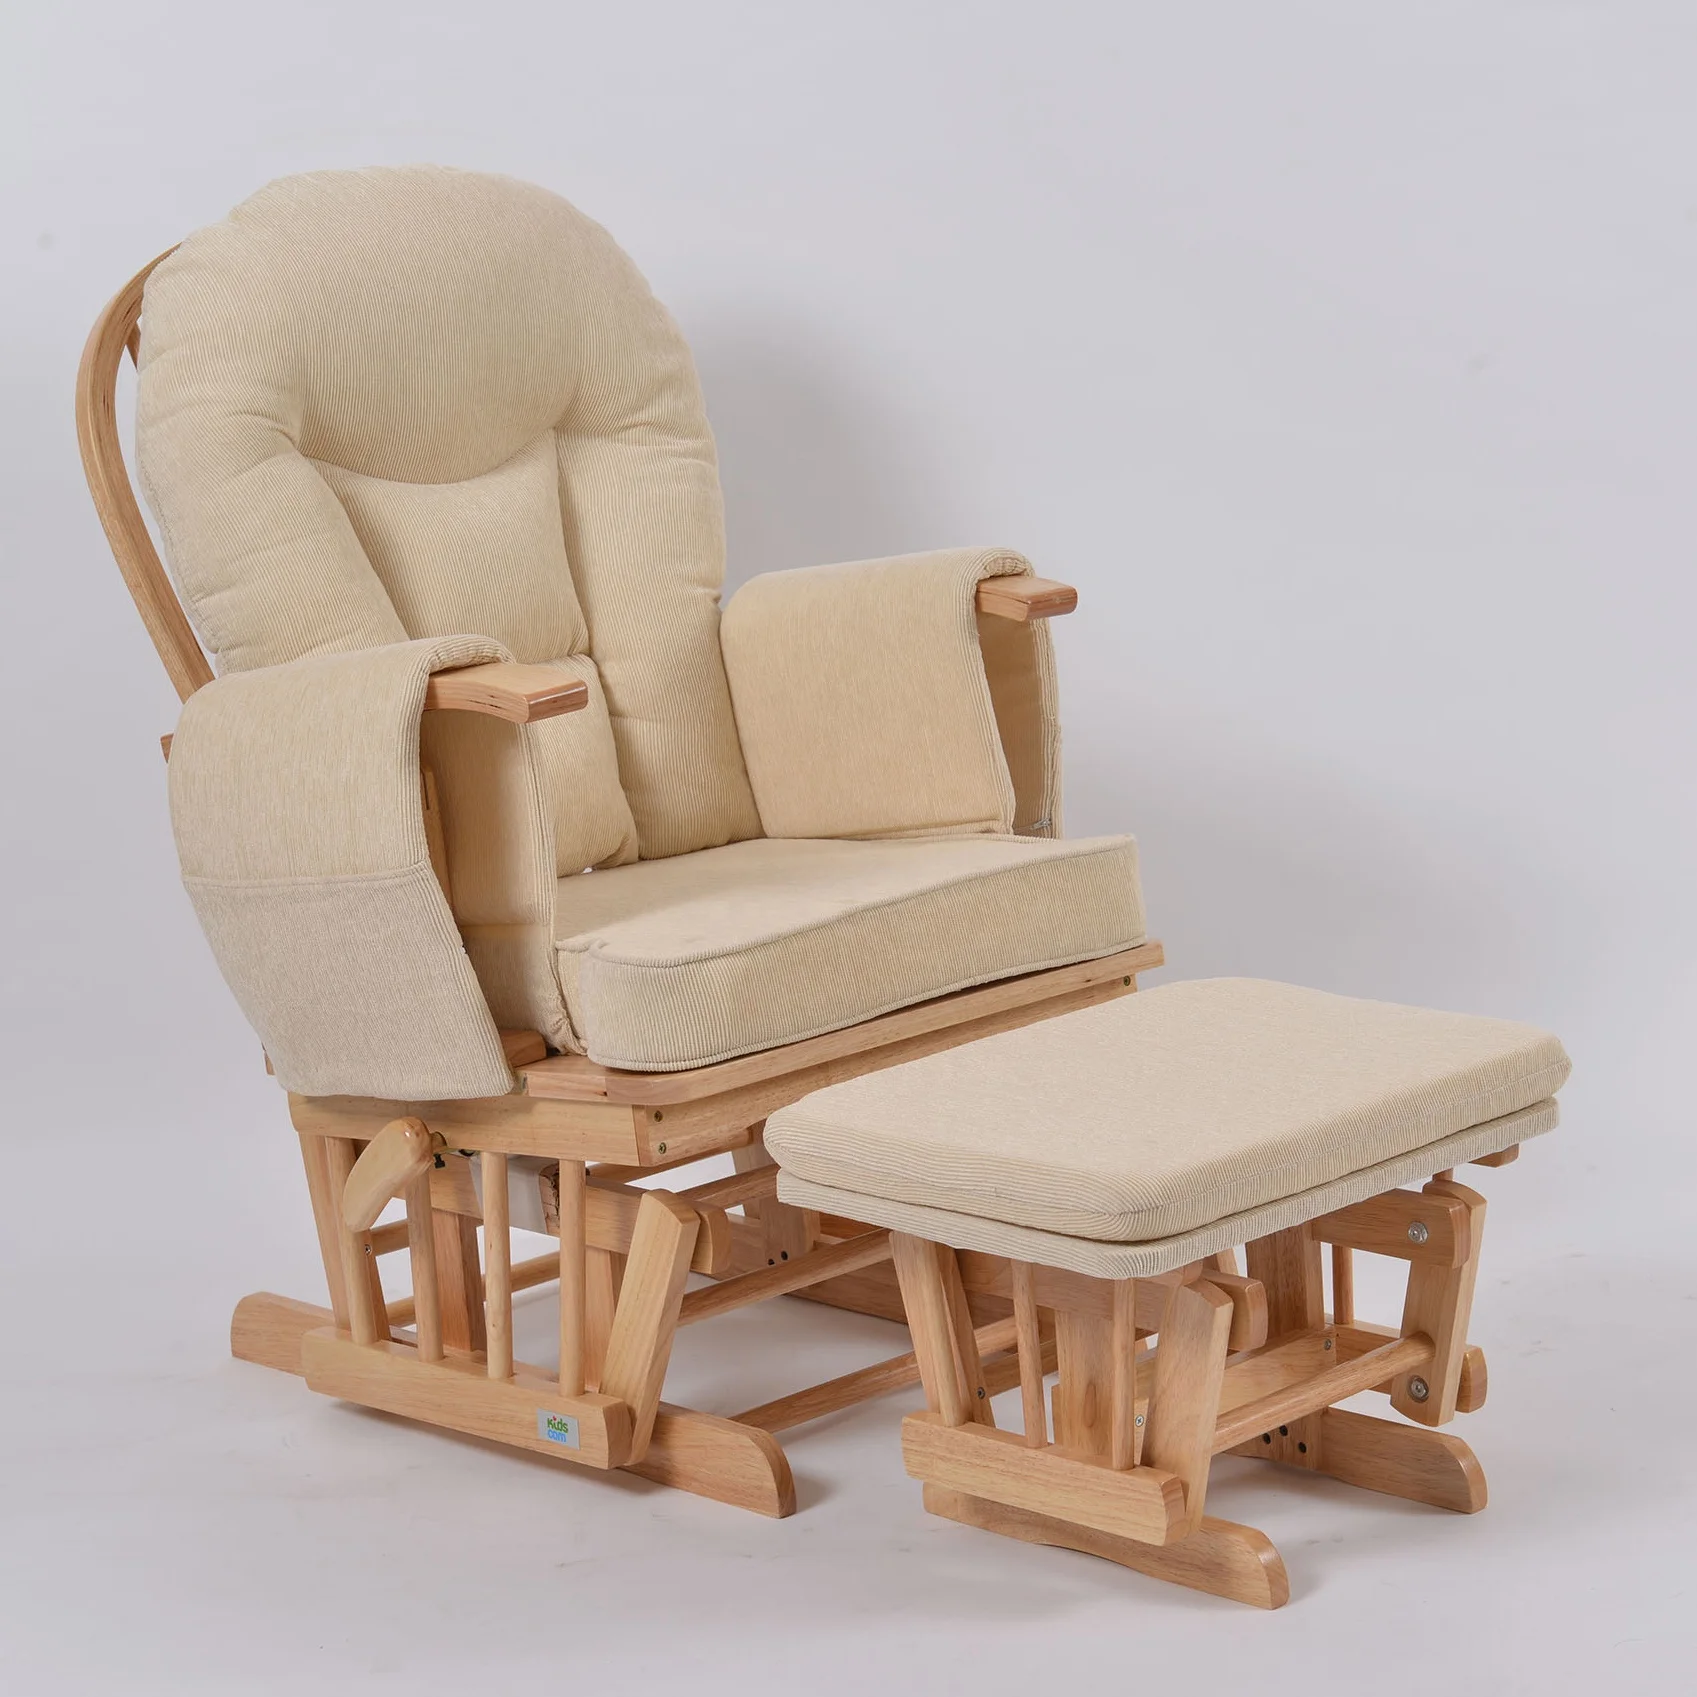 wooden baby rocking chair